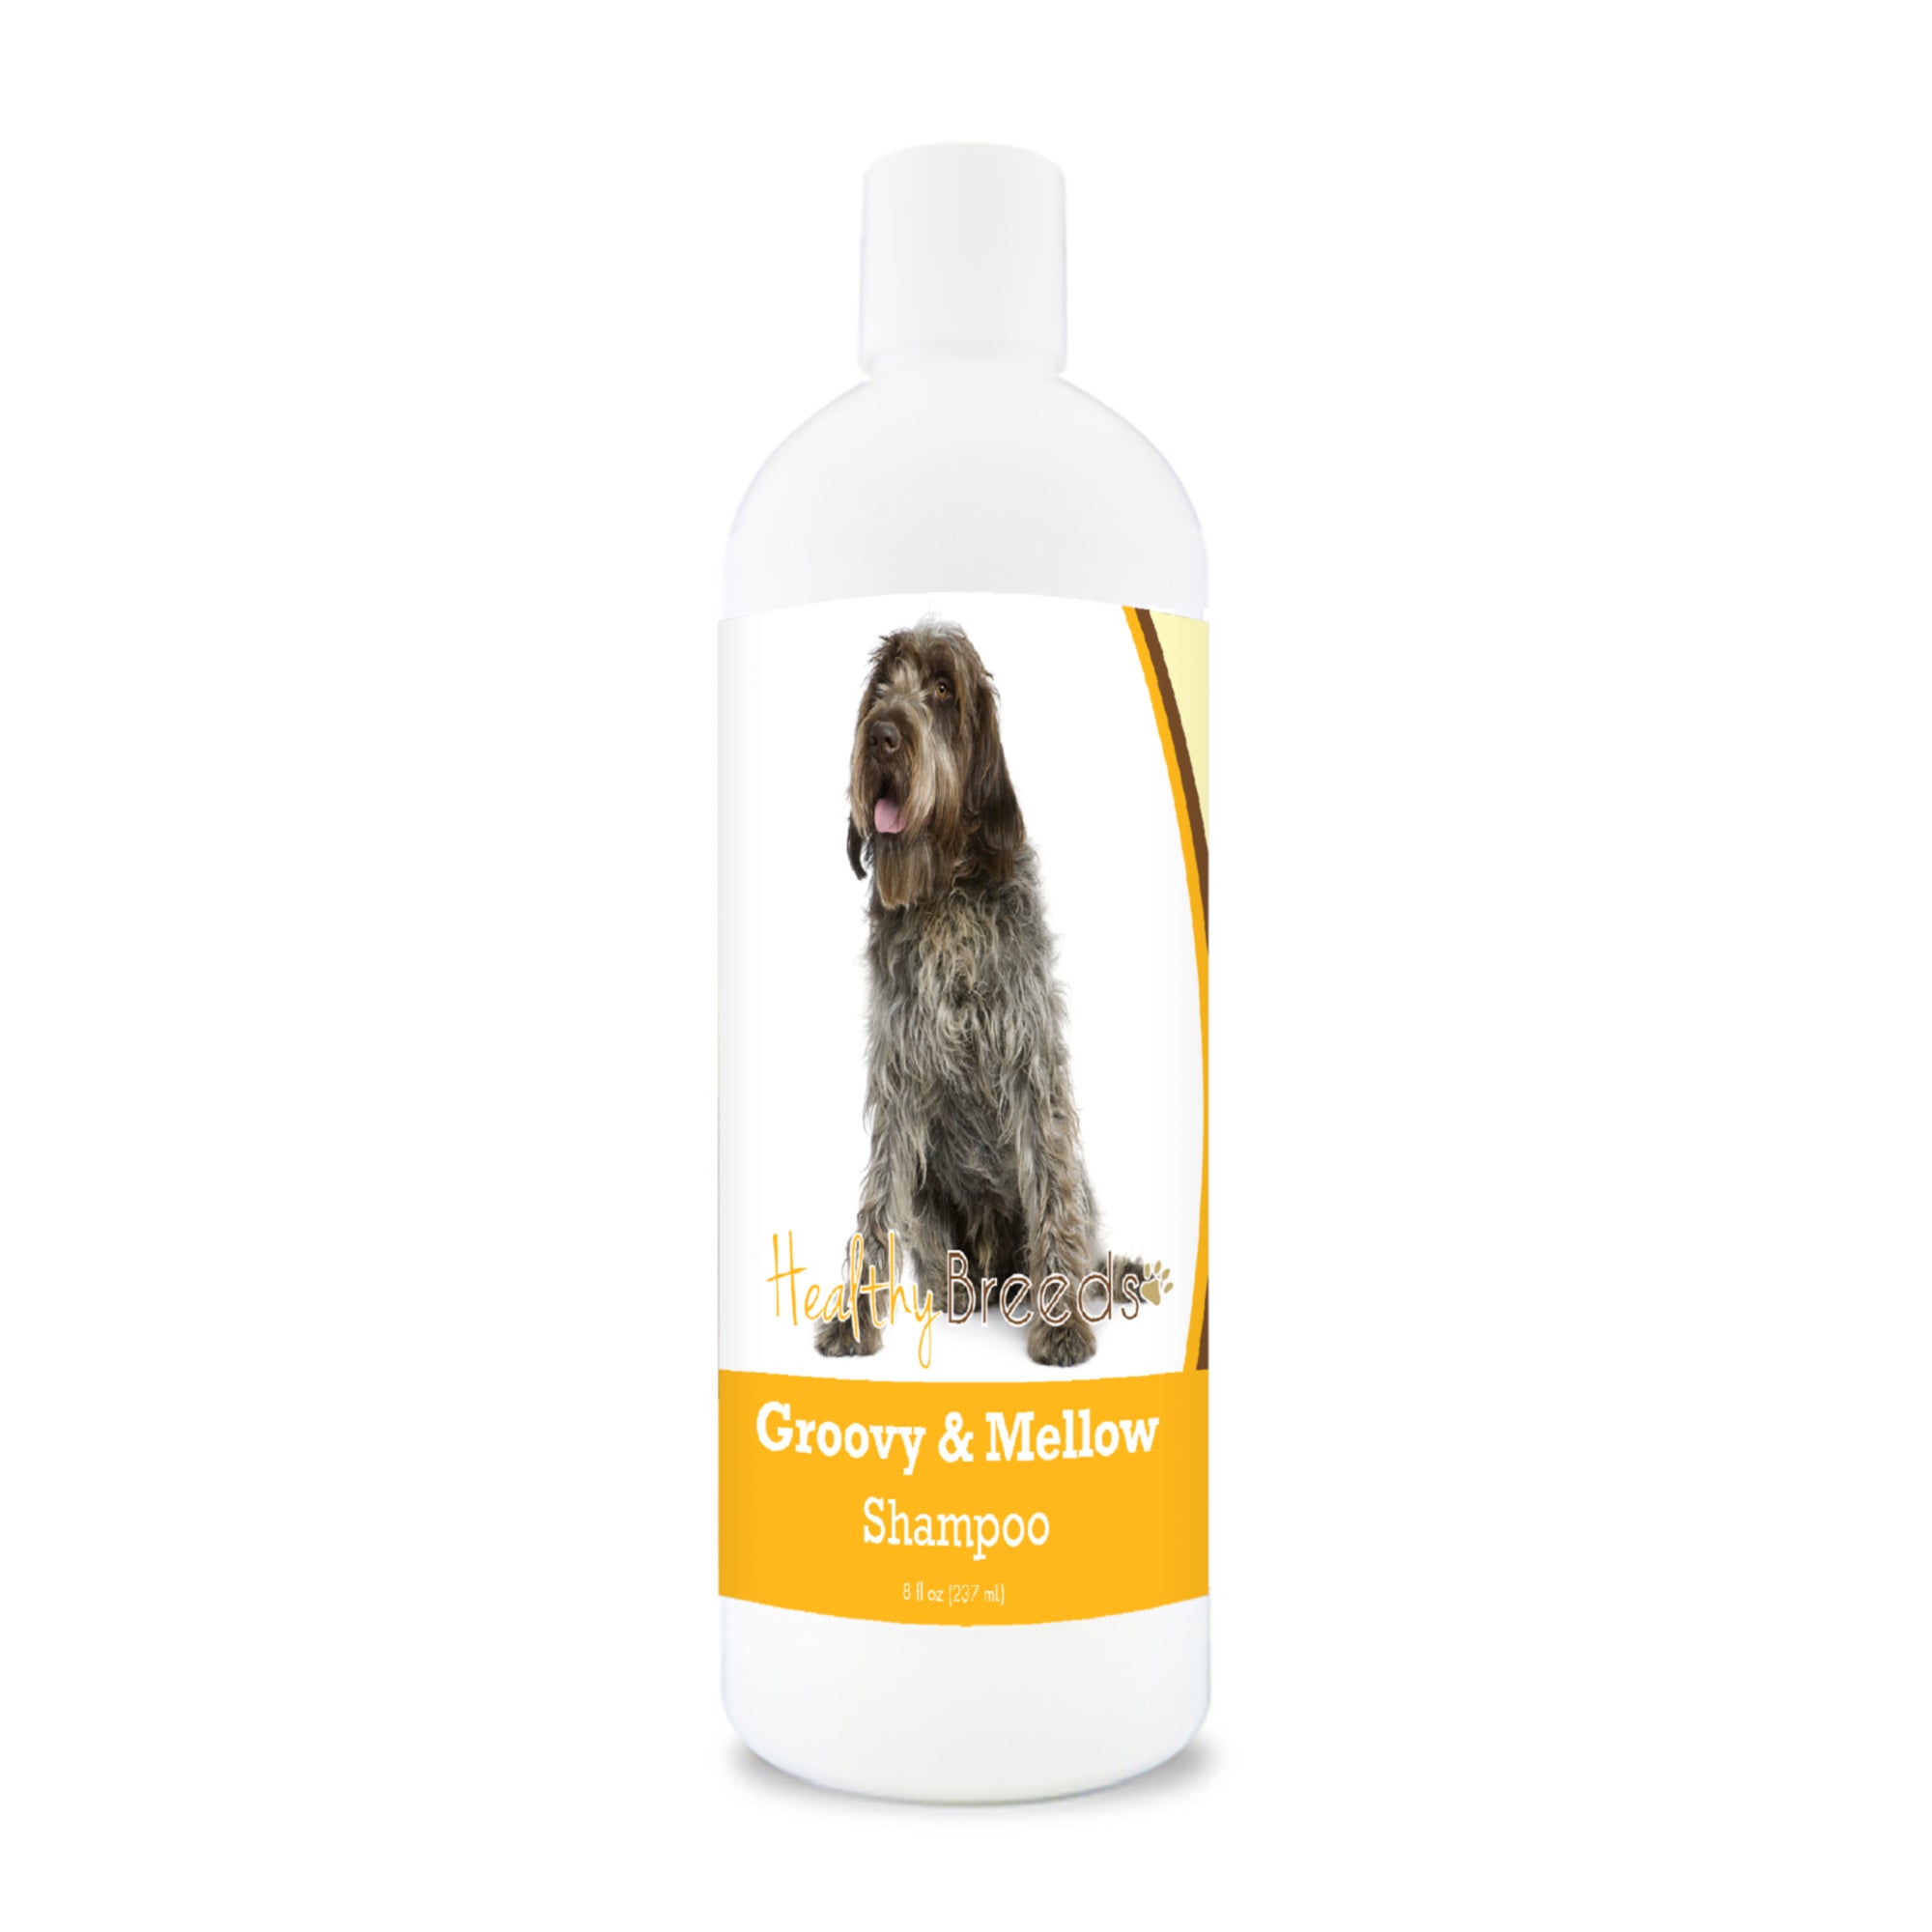 Wirehaired Pointing Griffon Groovy & Mellow Shampoo 8 oz